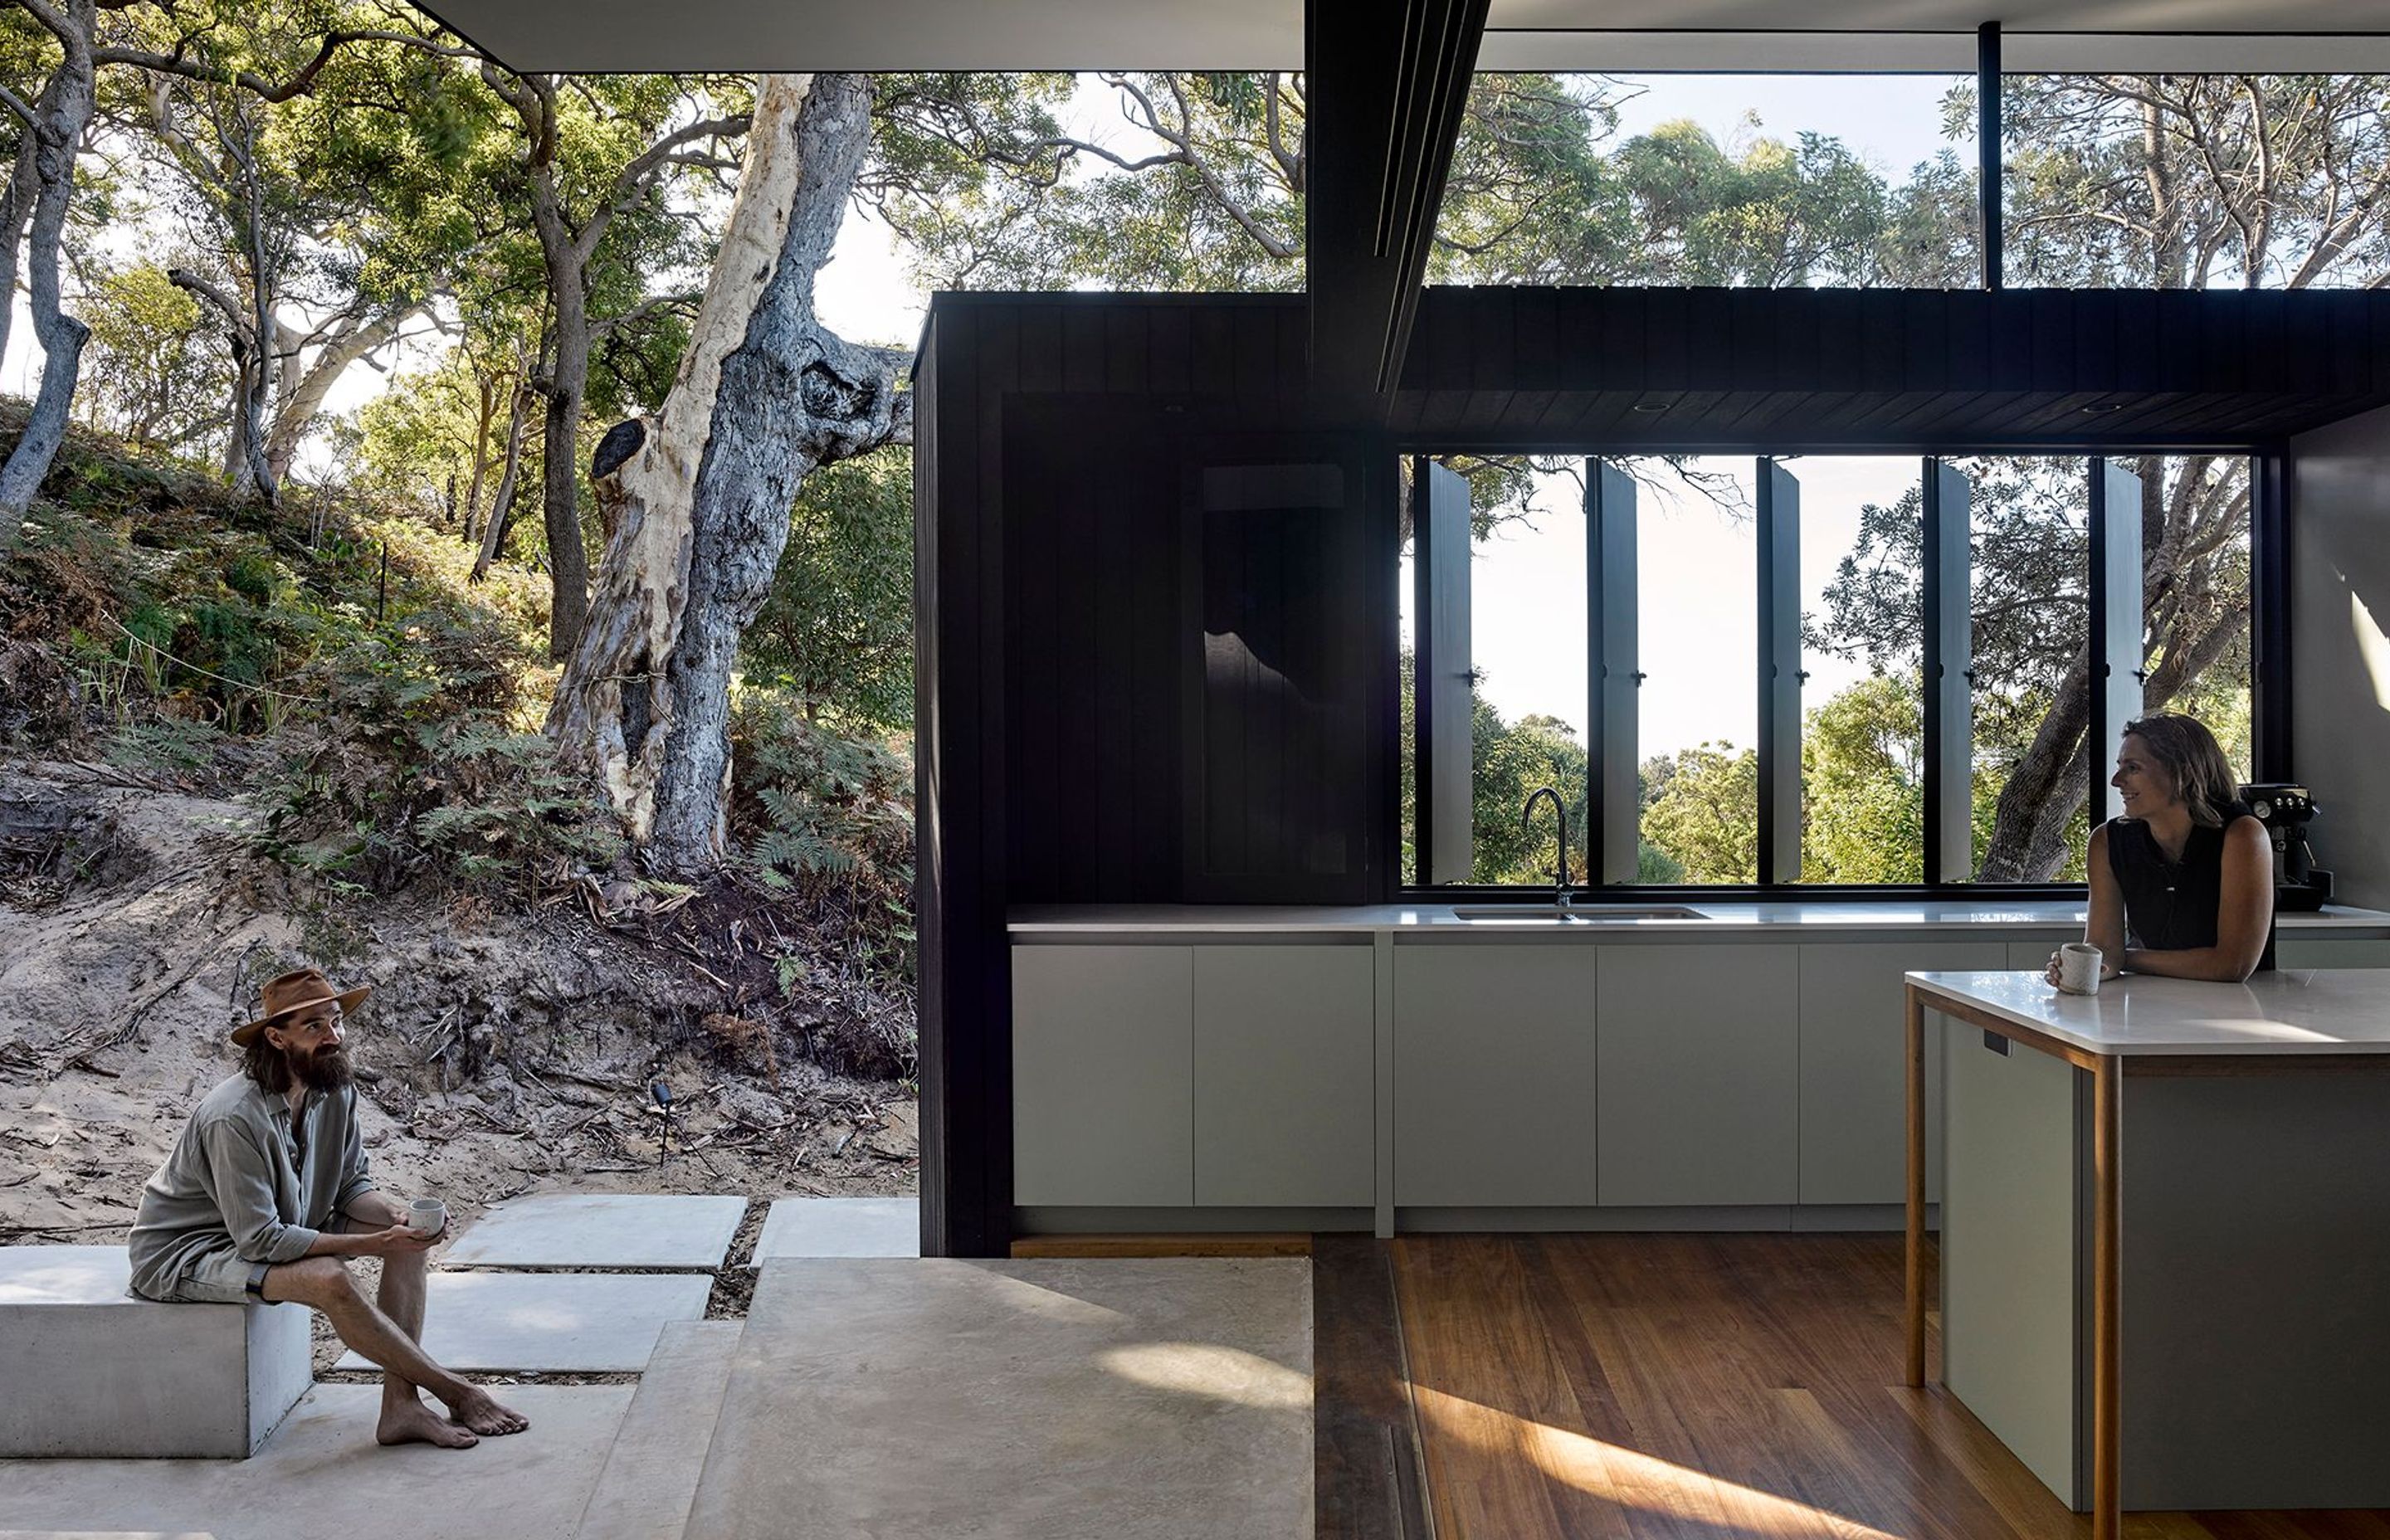 The outdoor bath is tucked away yet has the perfect outlook to the bush while the integrated fire place allows for gatherings secluded from the wind with distant ocean views